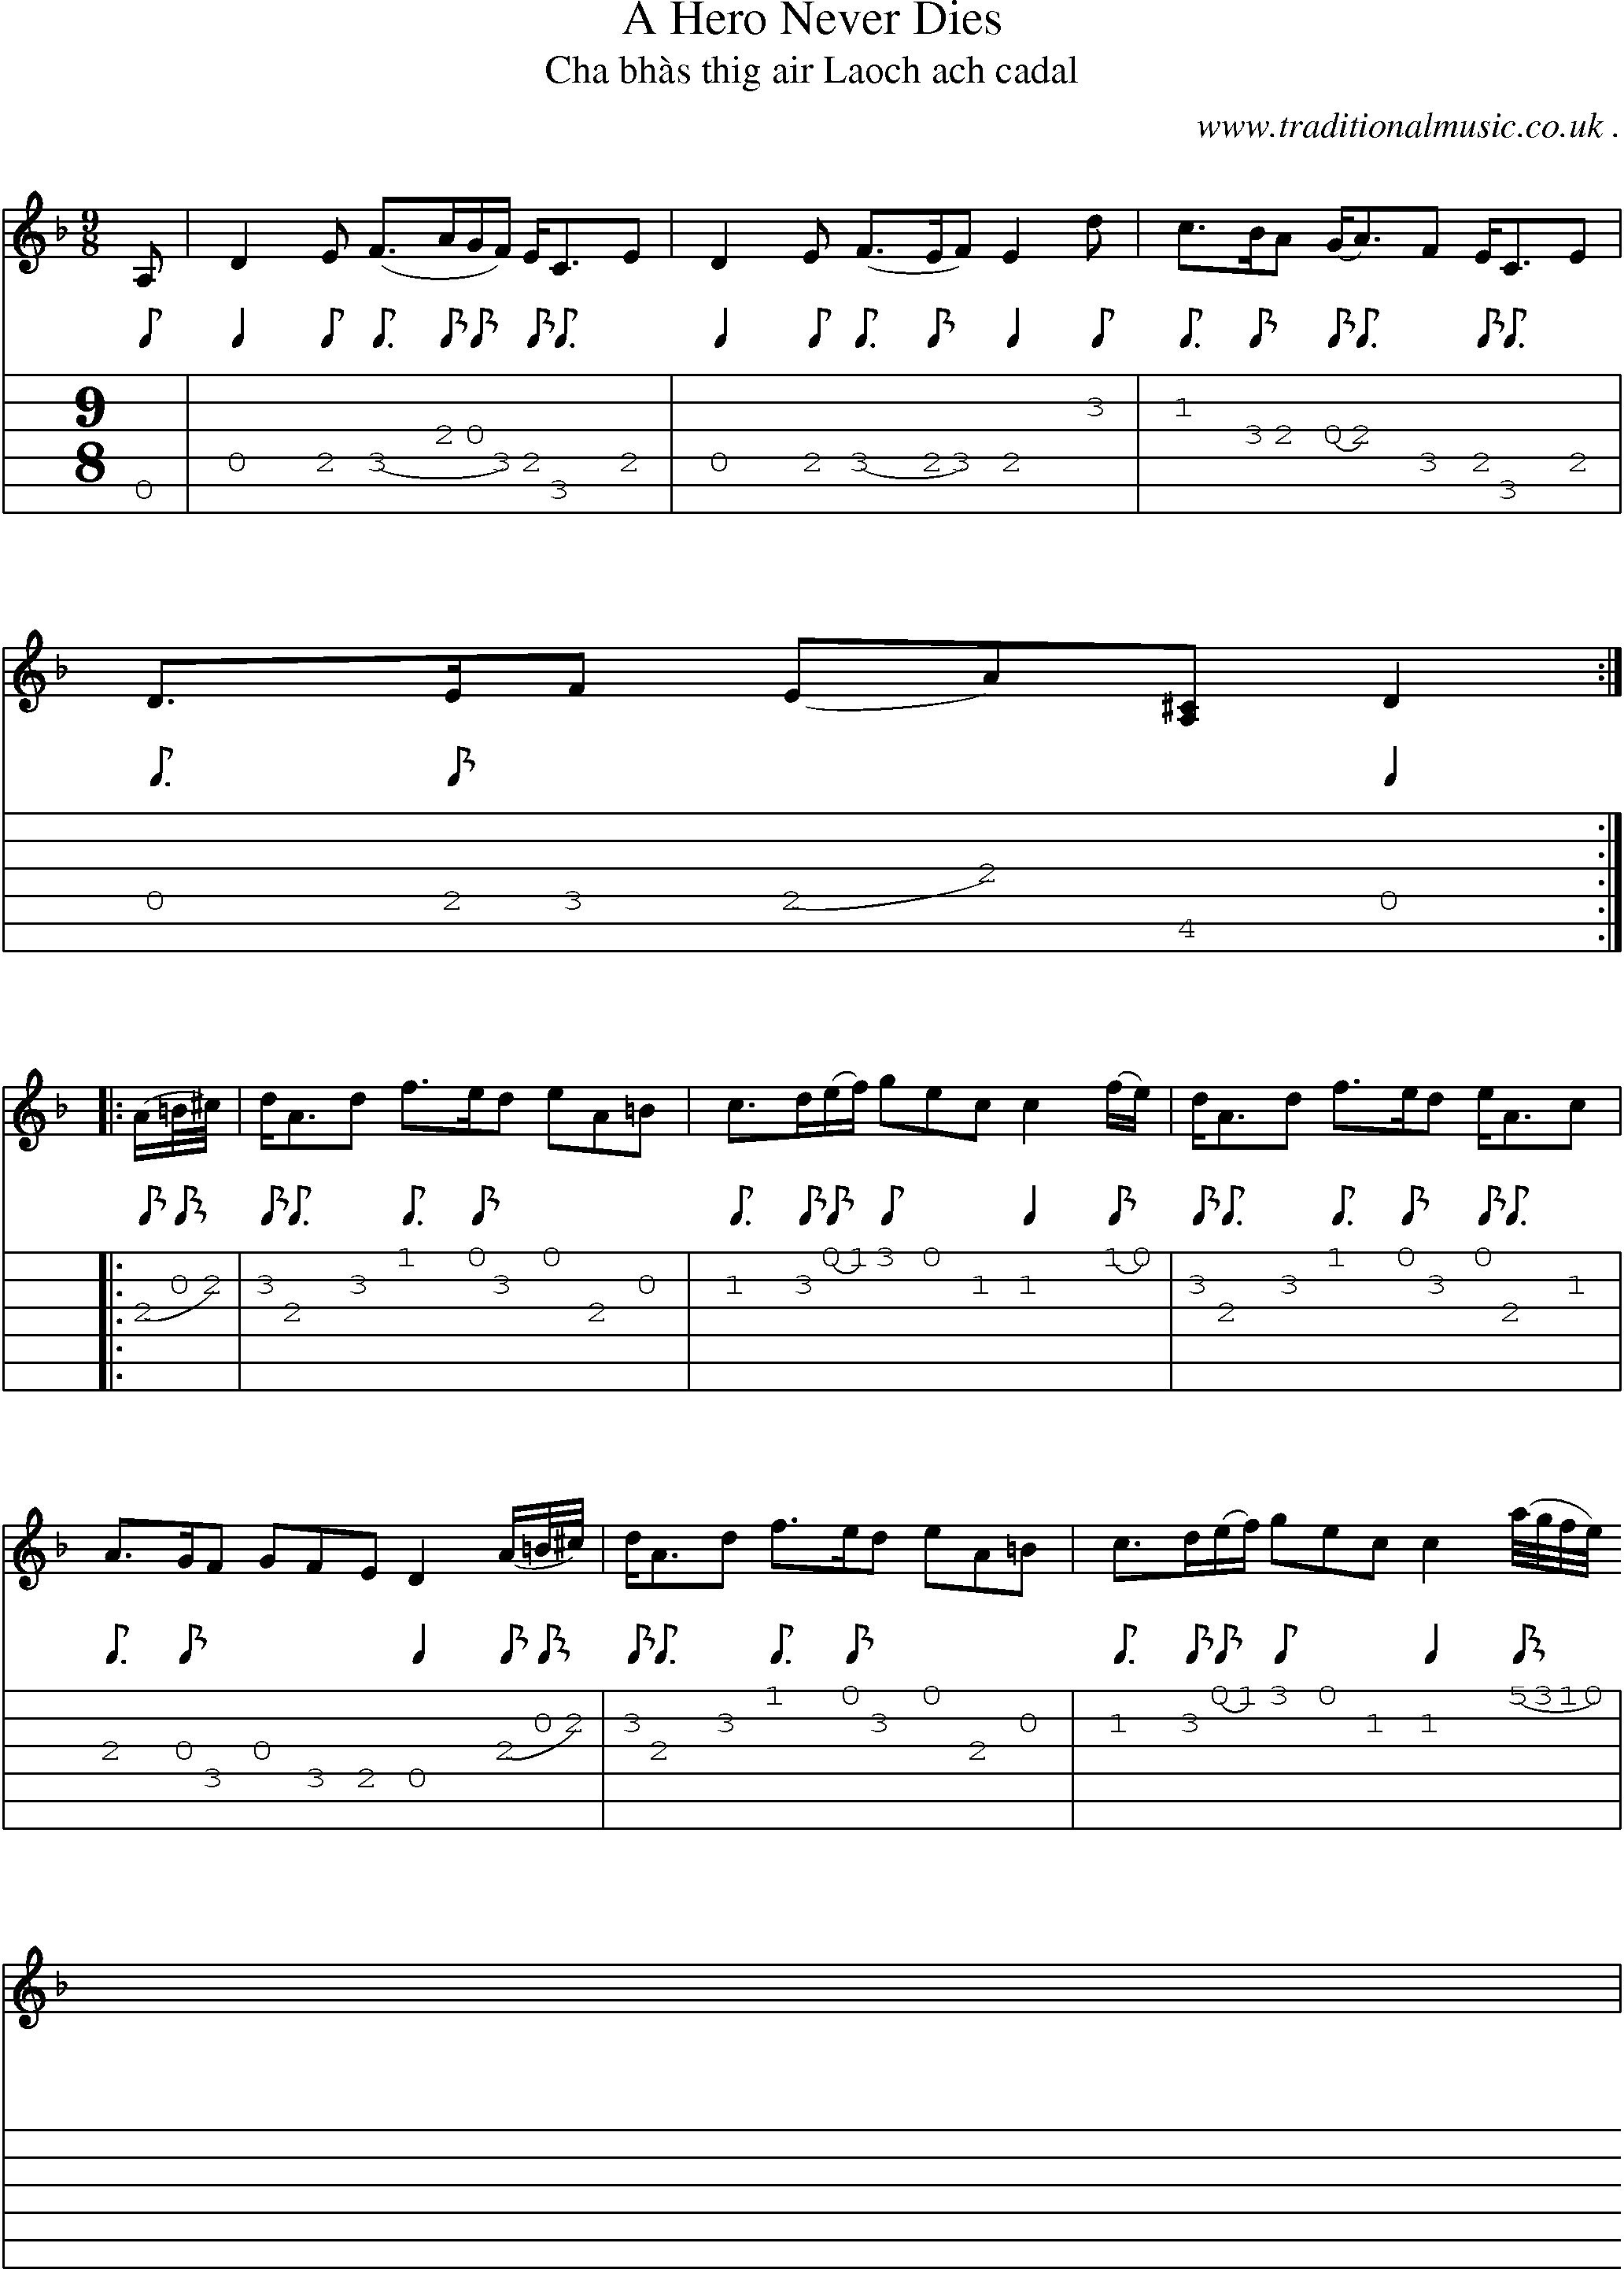 Sheet-music  score, Chords and Guitar Tabs for A Hero Never Dies